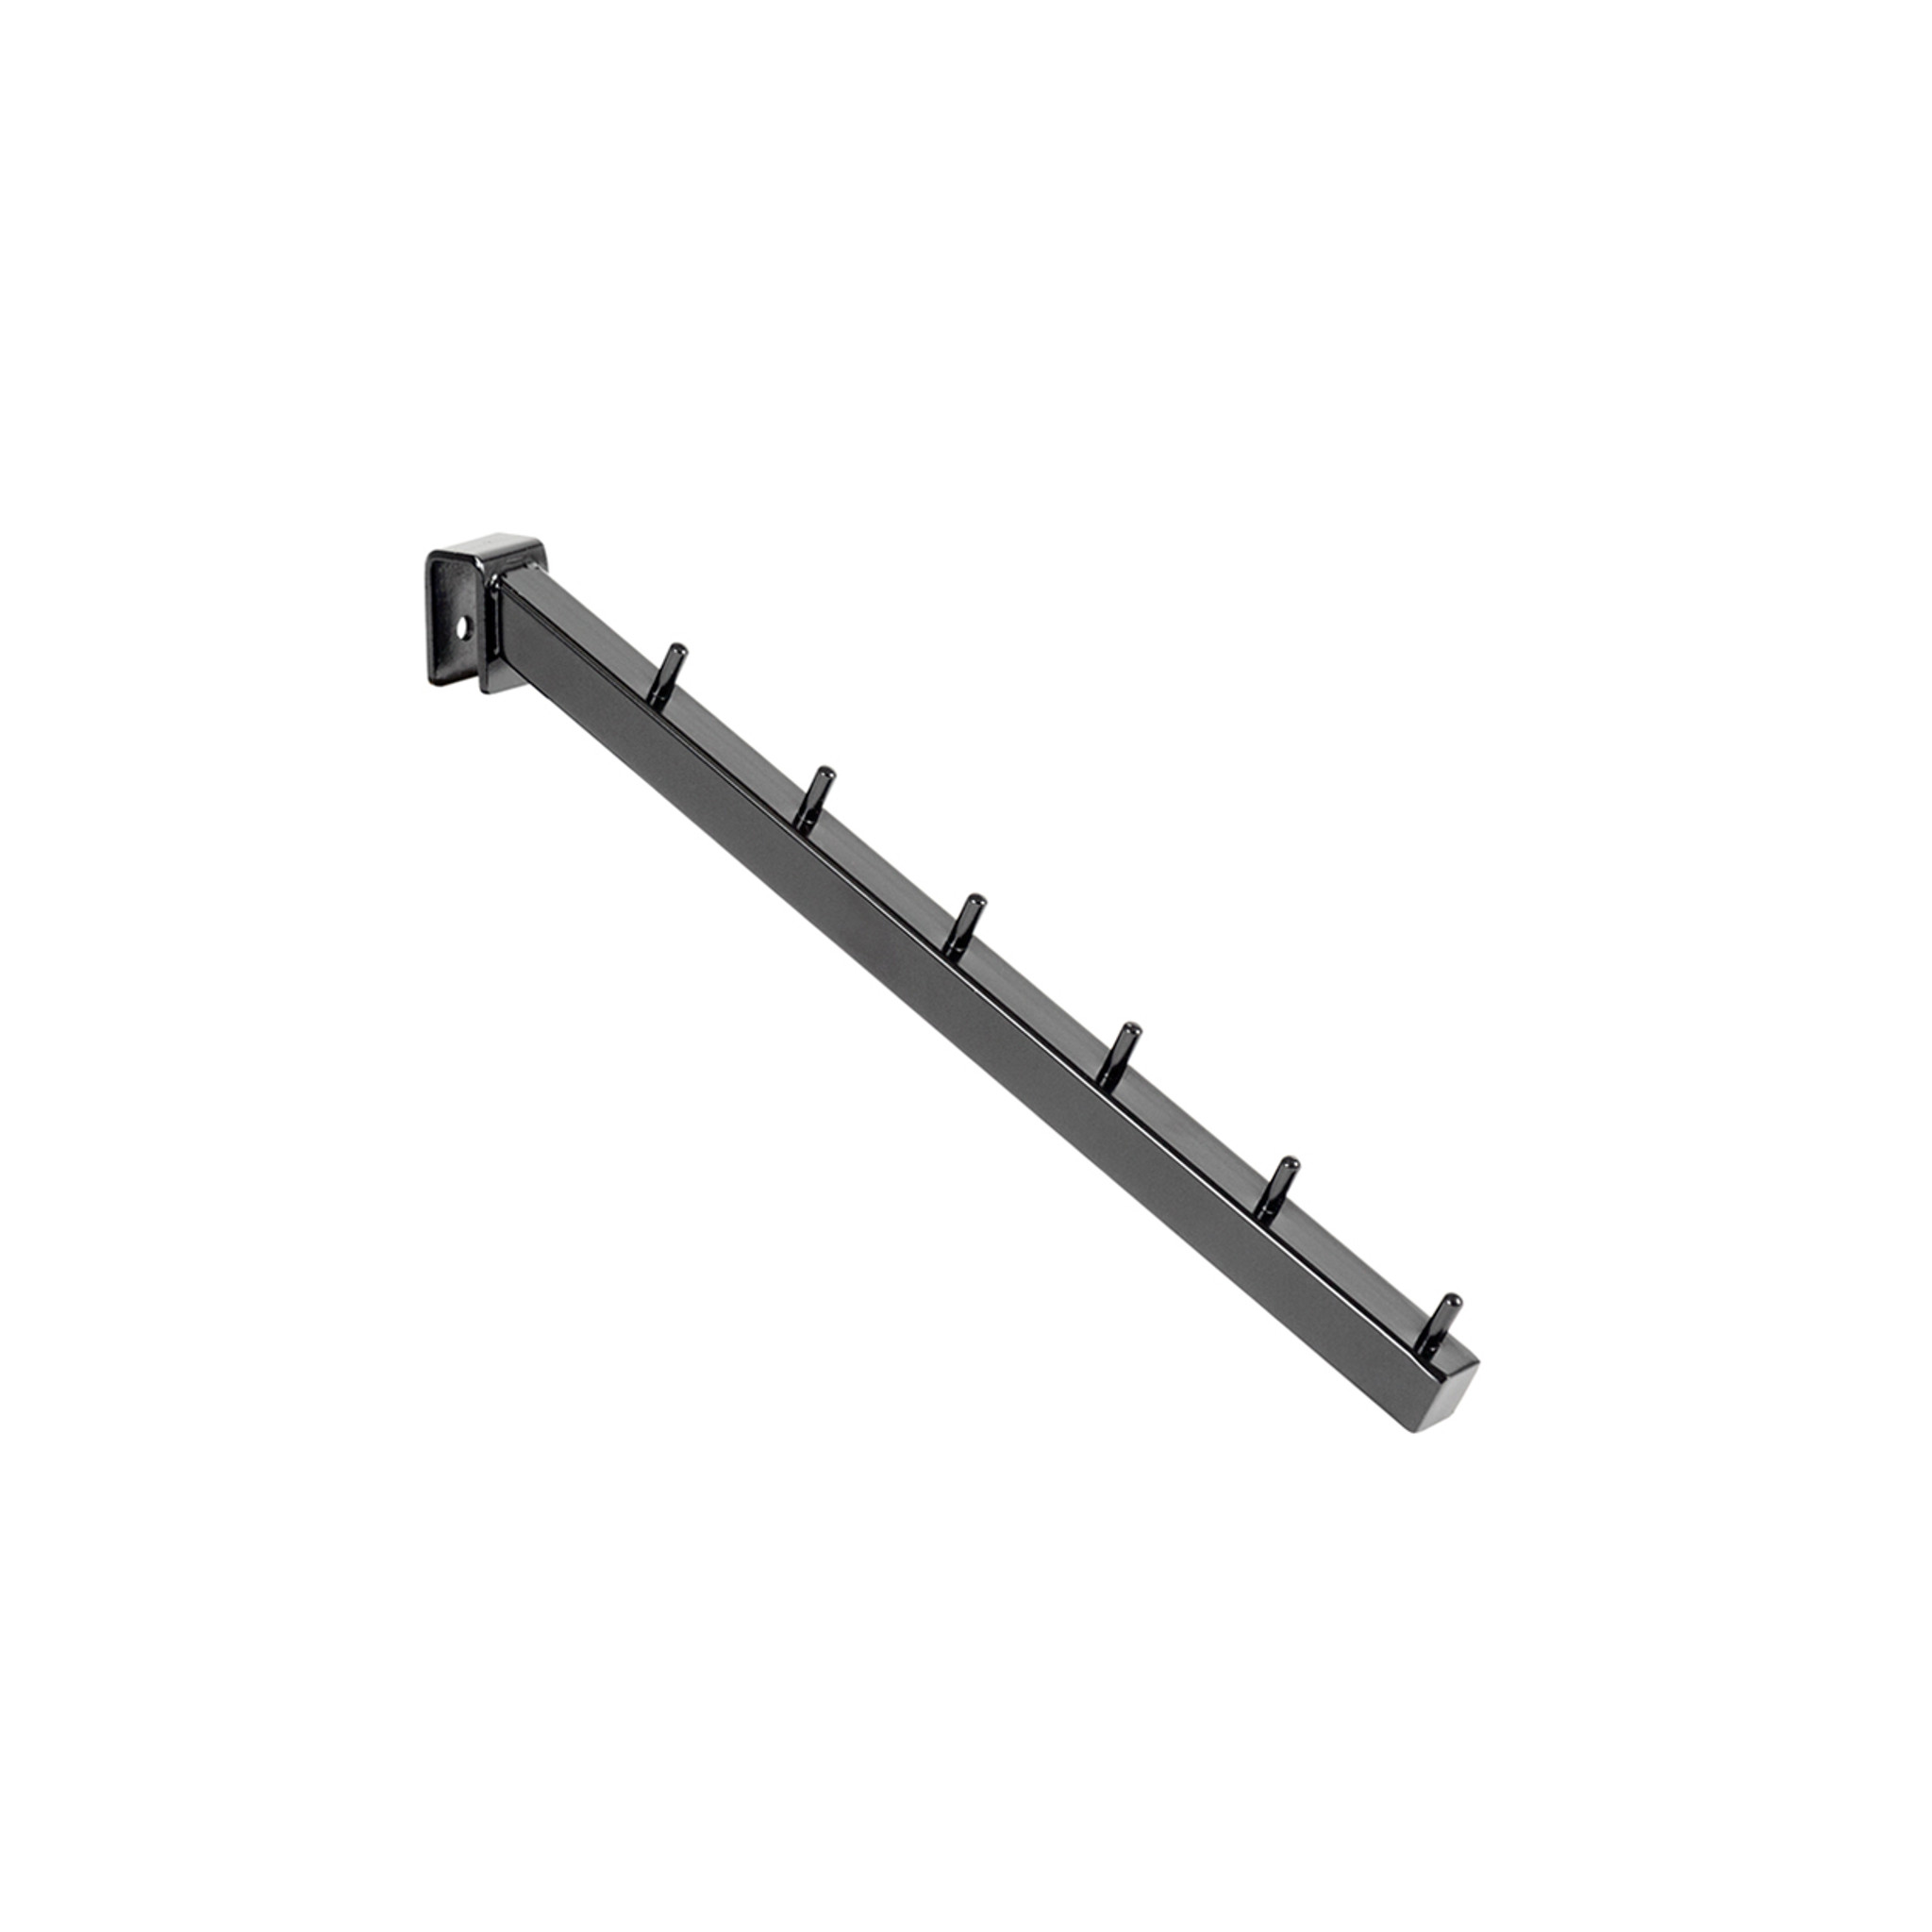 MAXe backrail waterfall arm with 6 pins 310 mm D 18 x 18 mm section ...